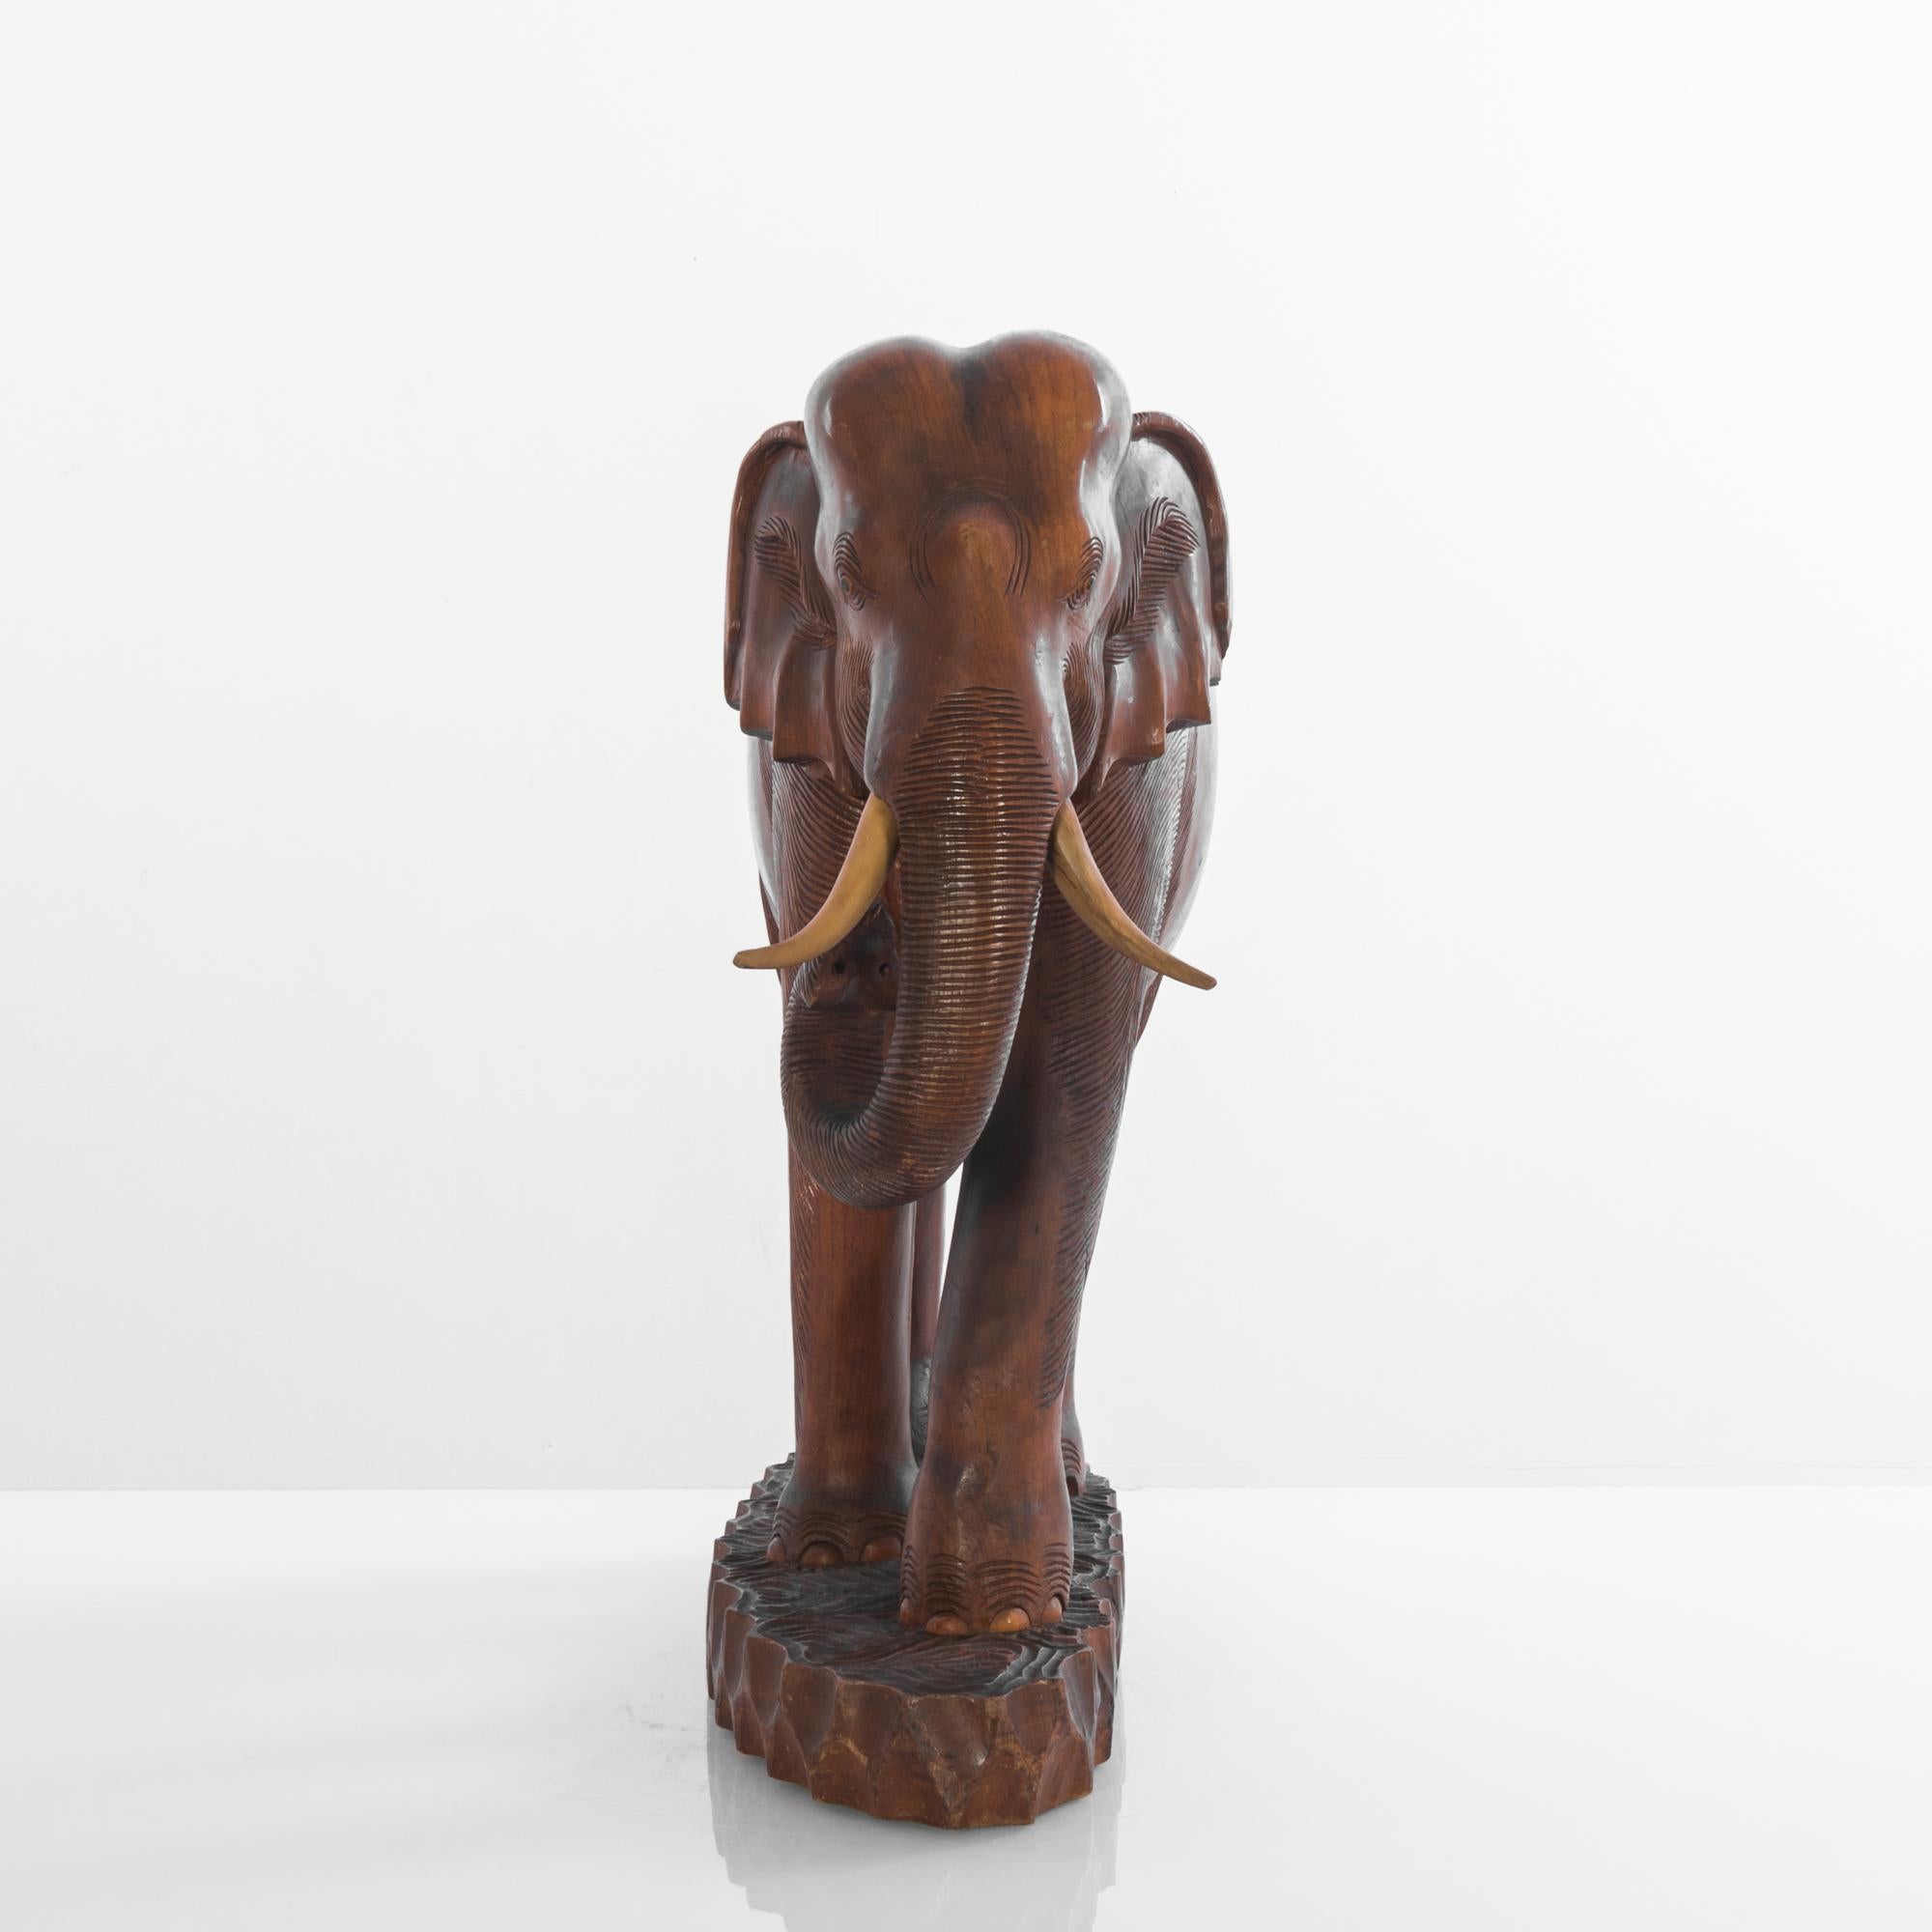 This 1950s African Wooden Elephant is an exquisite representation of traditional craftsmanship. The figure, carved with meticulous attention to detail, showcases a rich, warm patina that only time can bestow. Its lifelike tusks, rendered in a